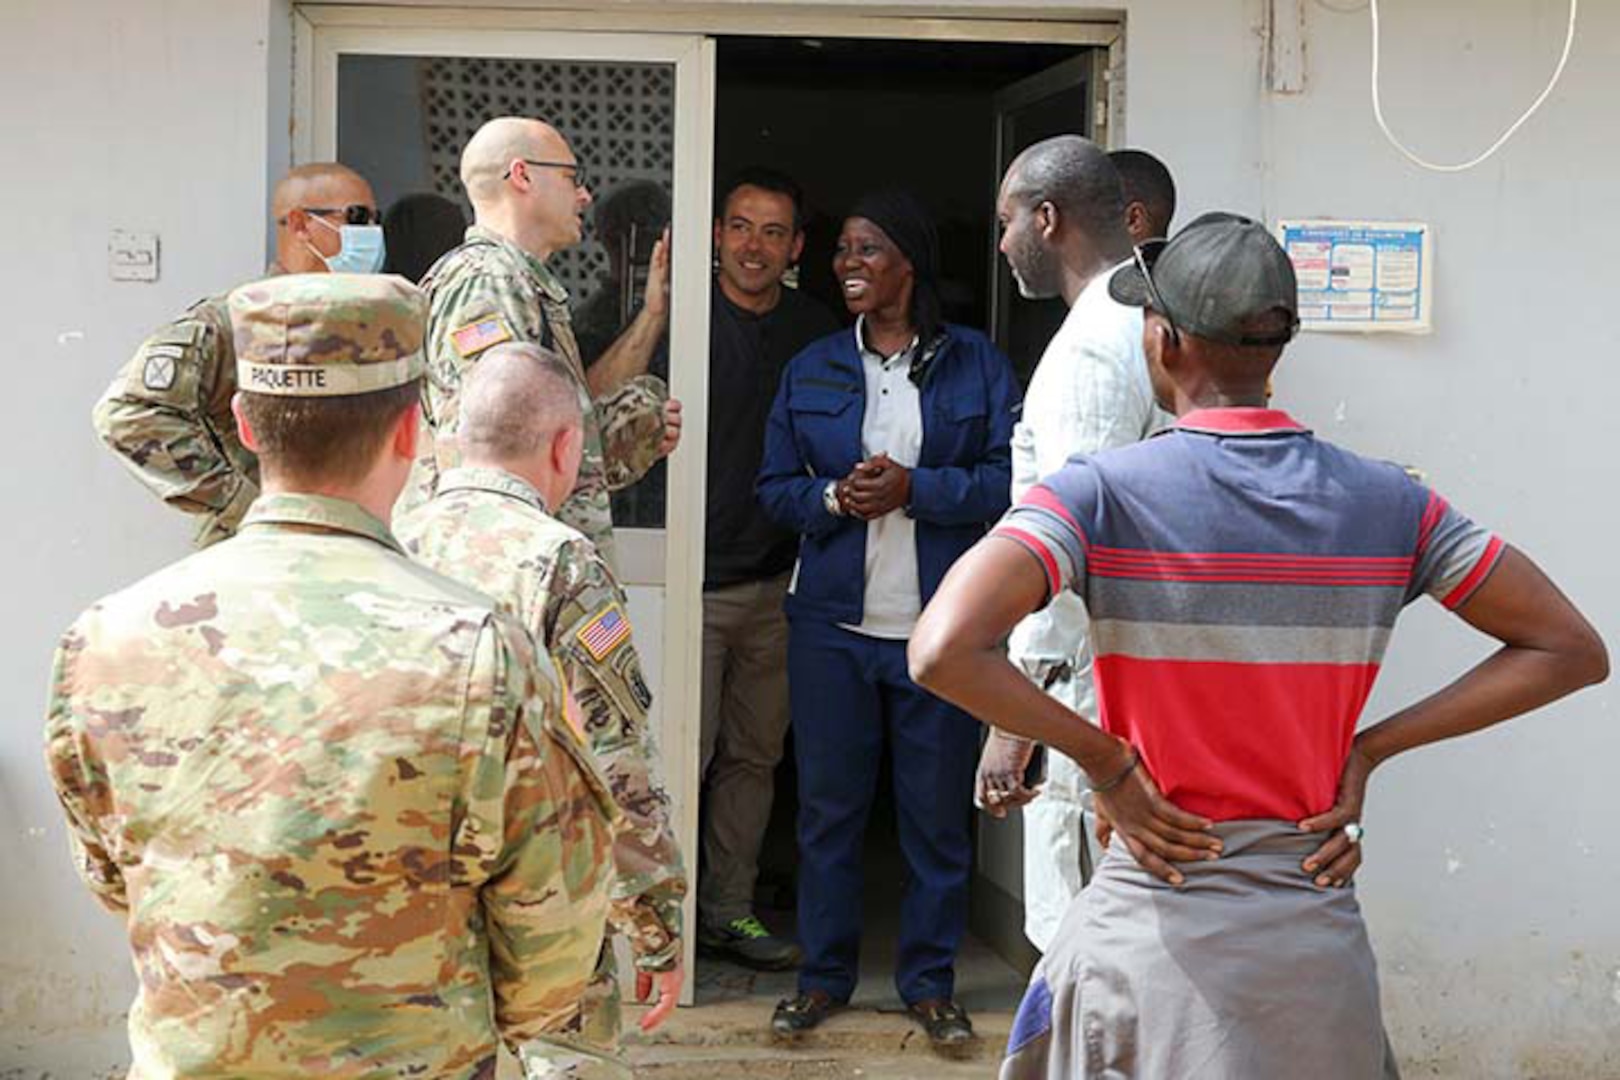 The Vermont The Vermont National Guard, shown working at the Thies Regional Hospital in Thies, Senegal, as part of a medical readiness exercise organized by the State Partnership Program, has partnered with Senegal under the program since 2008. The Burlington, Vermont, City Council voted unanimously March 25, 2024, to forge a sister city relationship with Thies-East, Senegal.